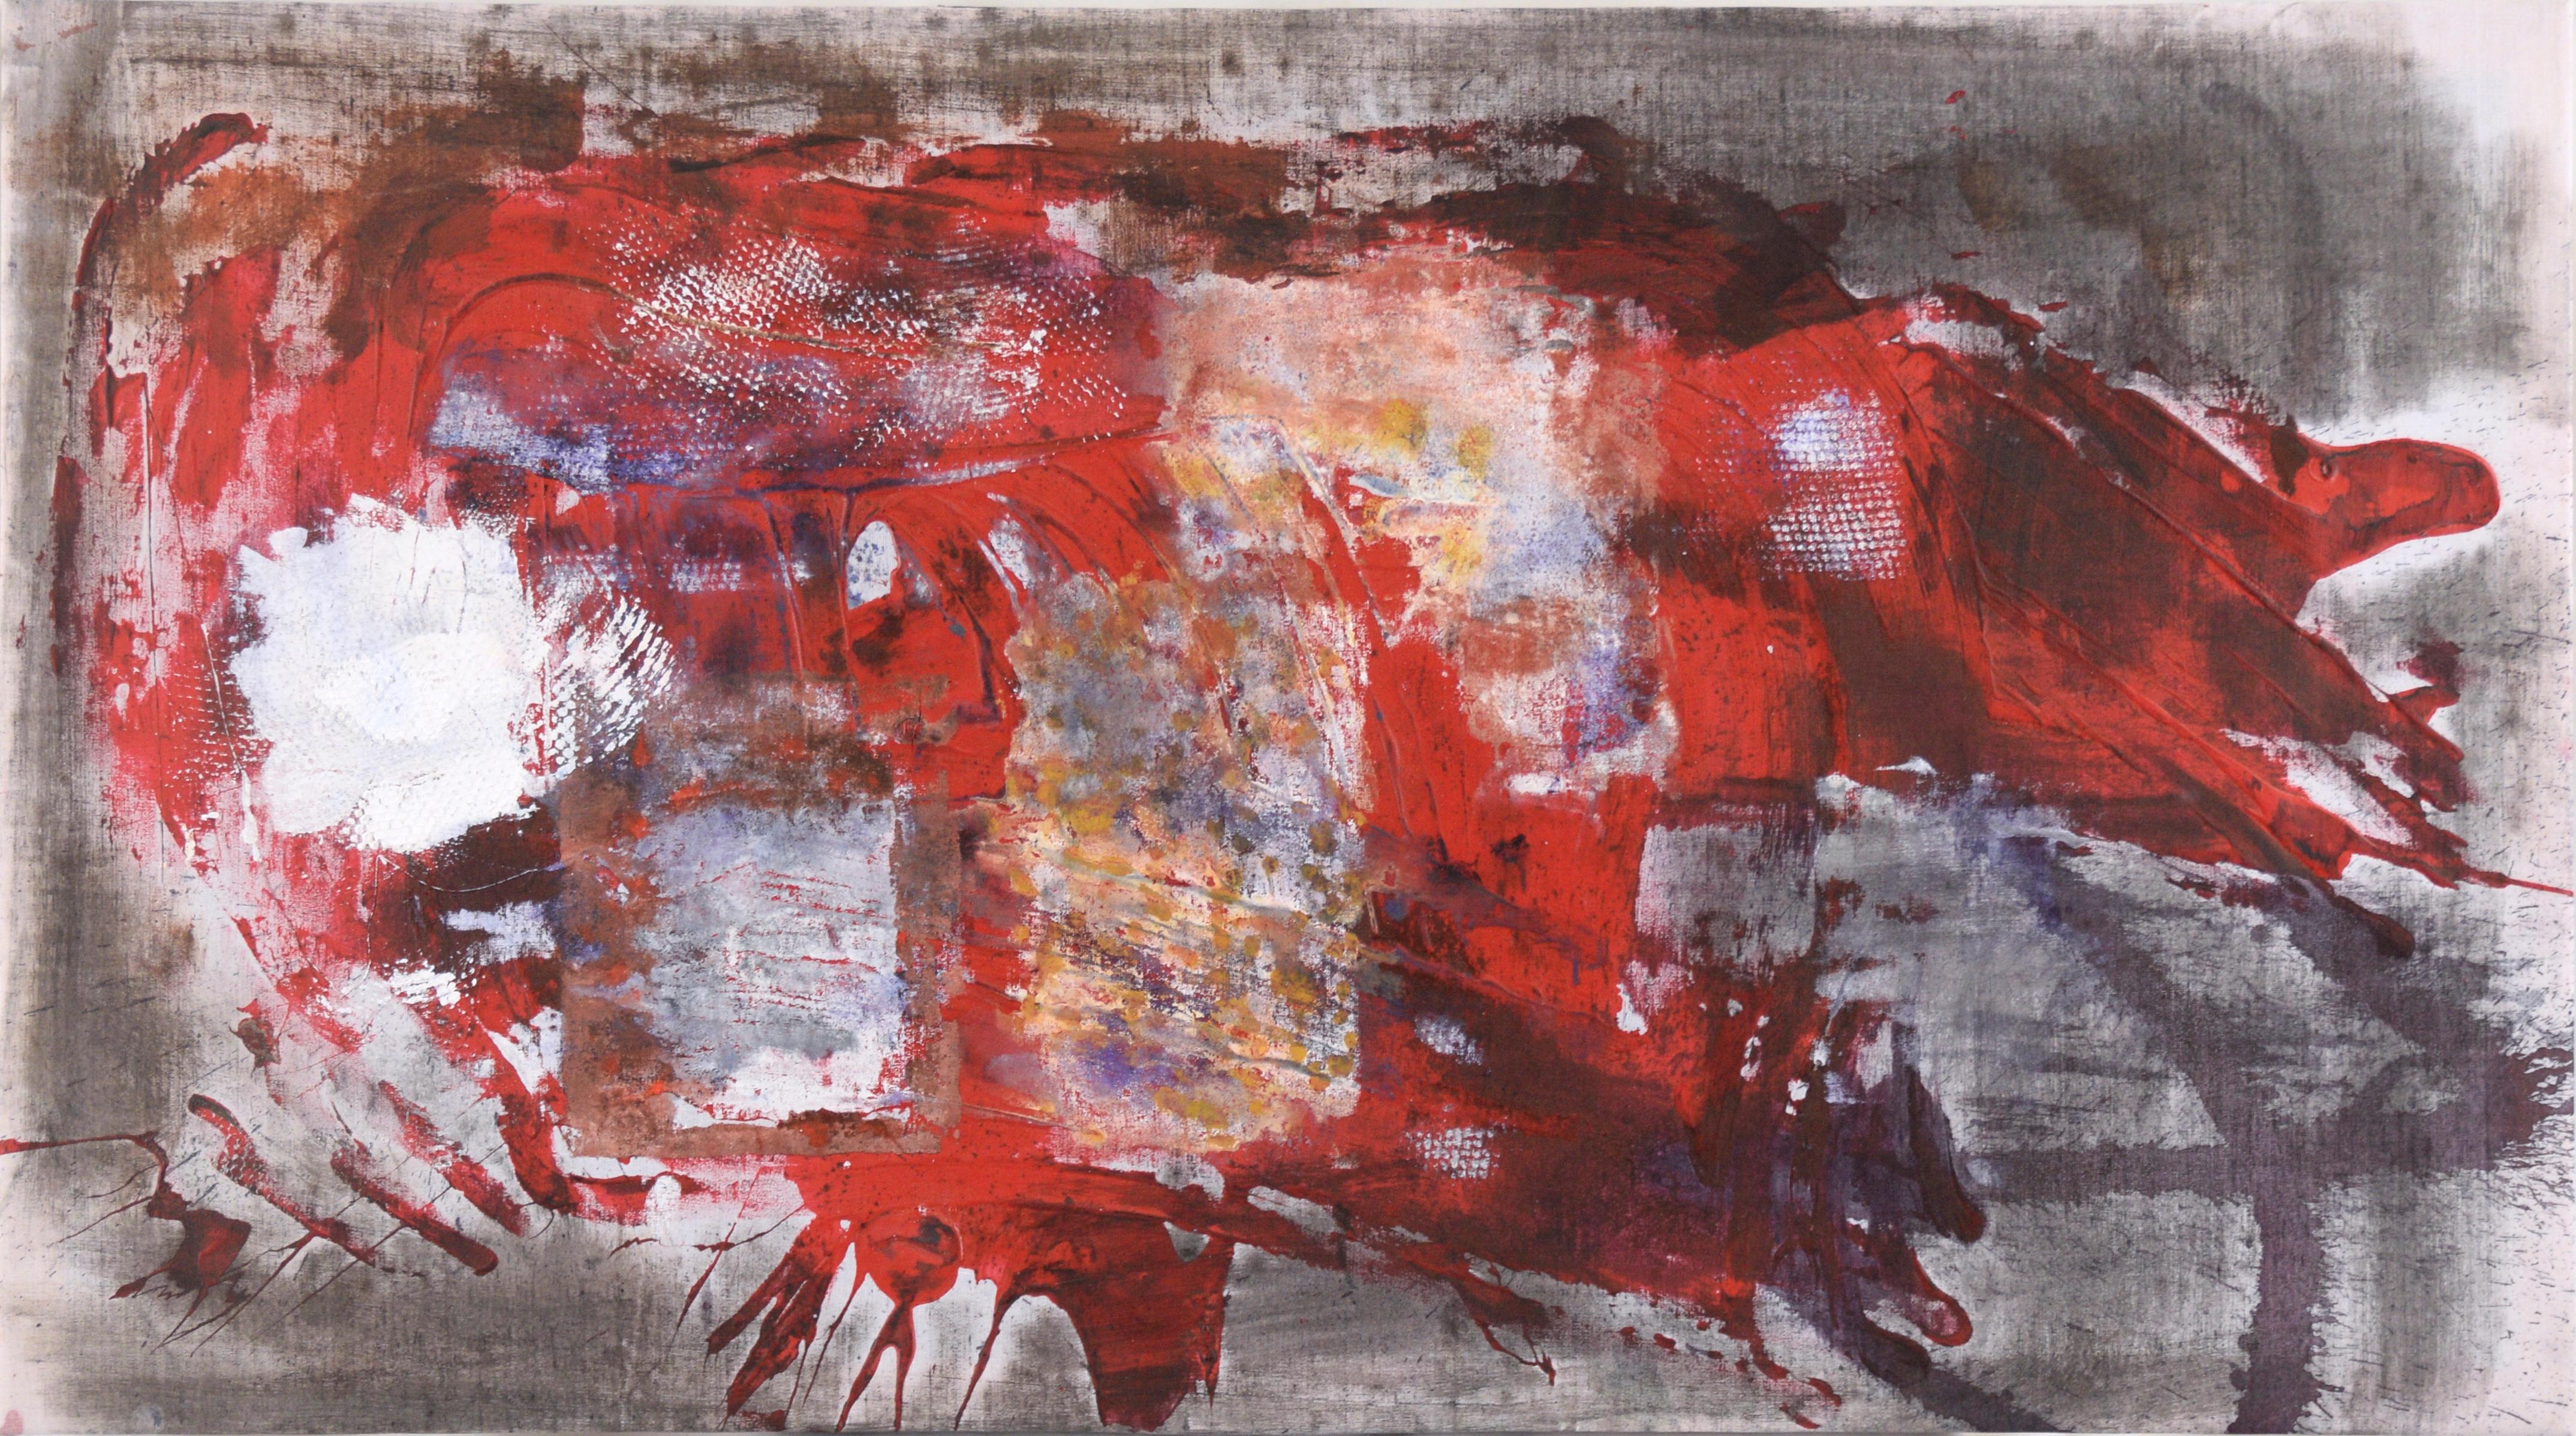 D Whalen Abstract Painting - Red Splatters on  Grey Field - Abstract Expressionist in Acrylic on Linen